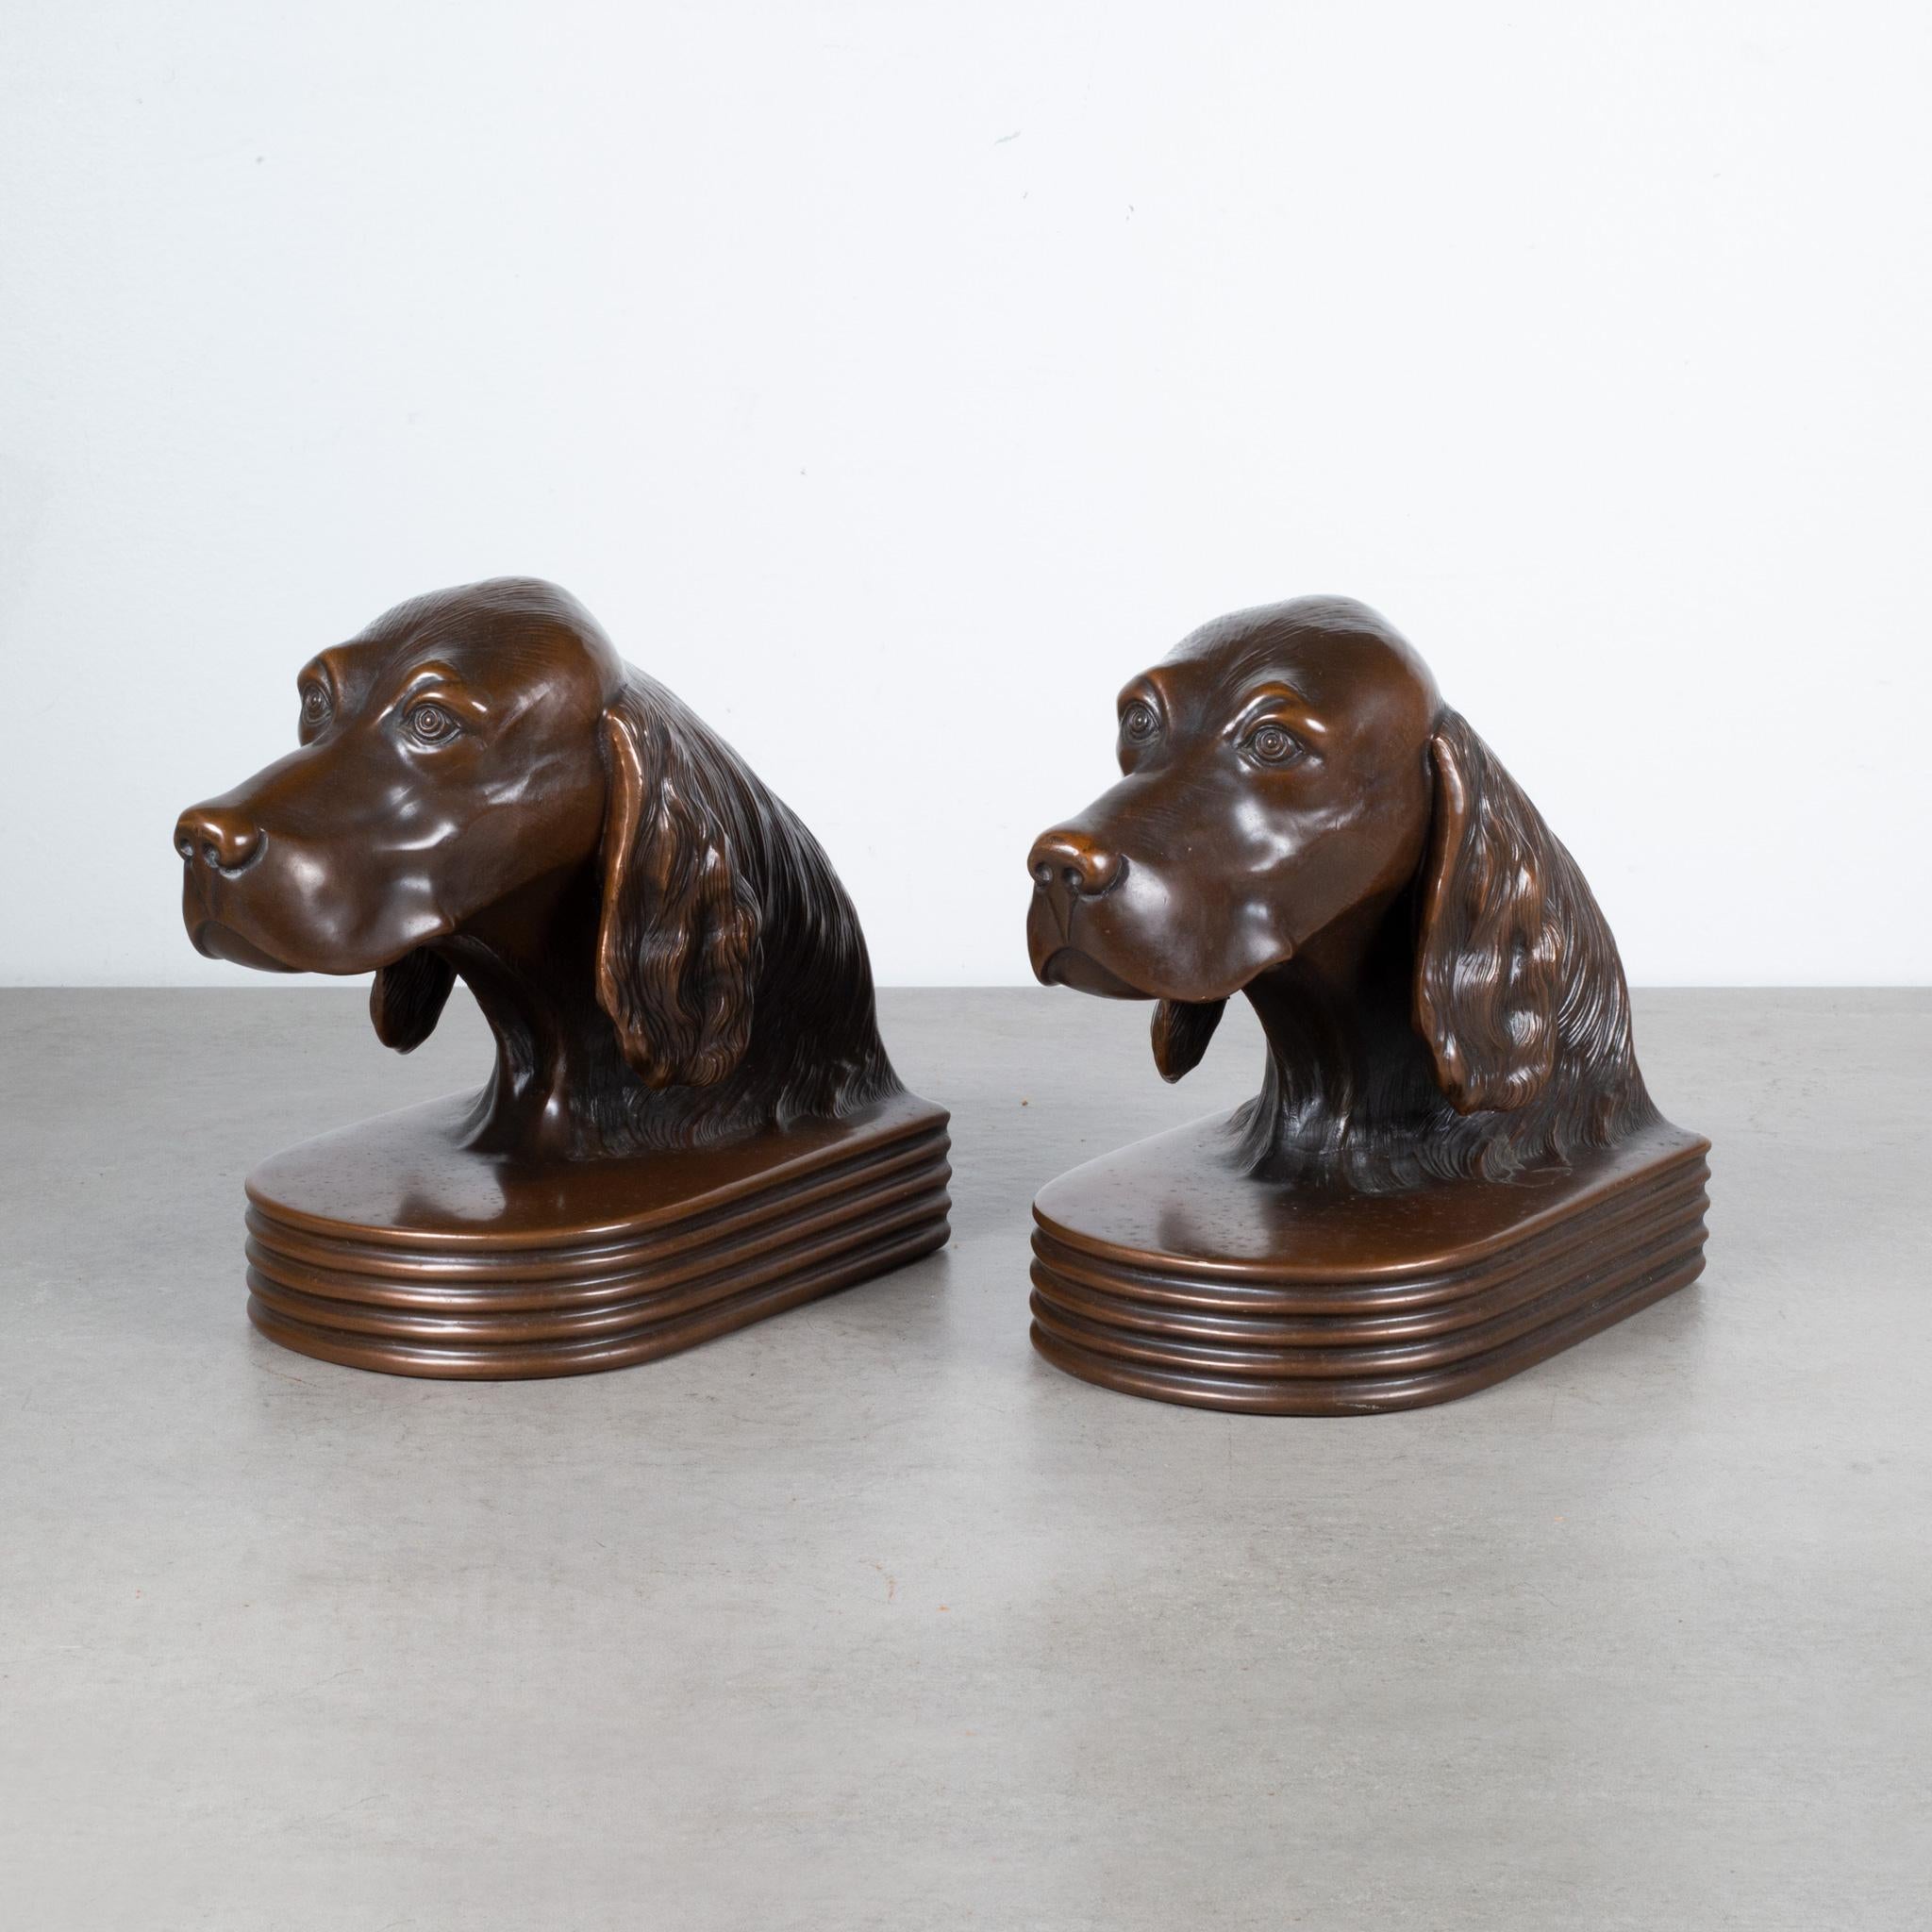 ABOUT

Art Deco bronze plated Irish Setter bookends manufactured by Jennings Brothers. Embossed 